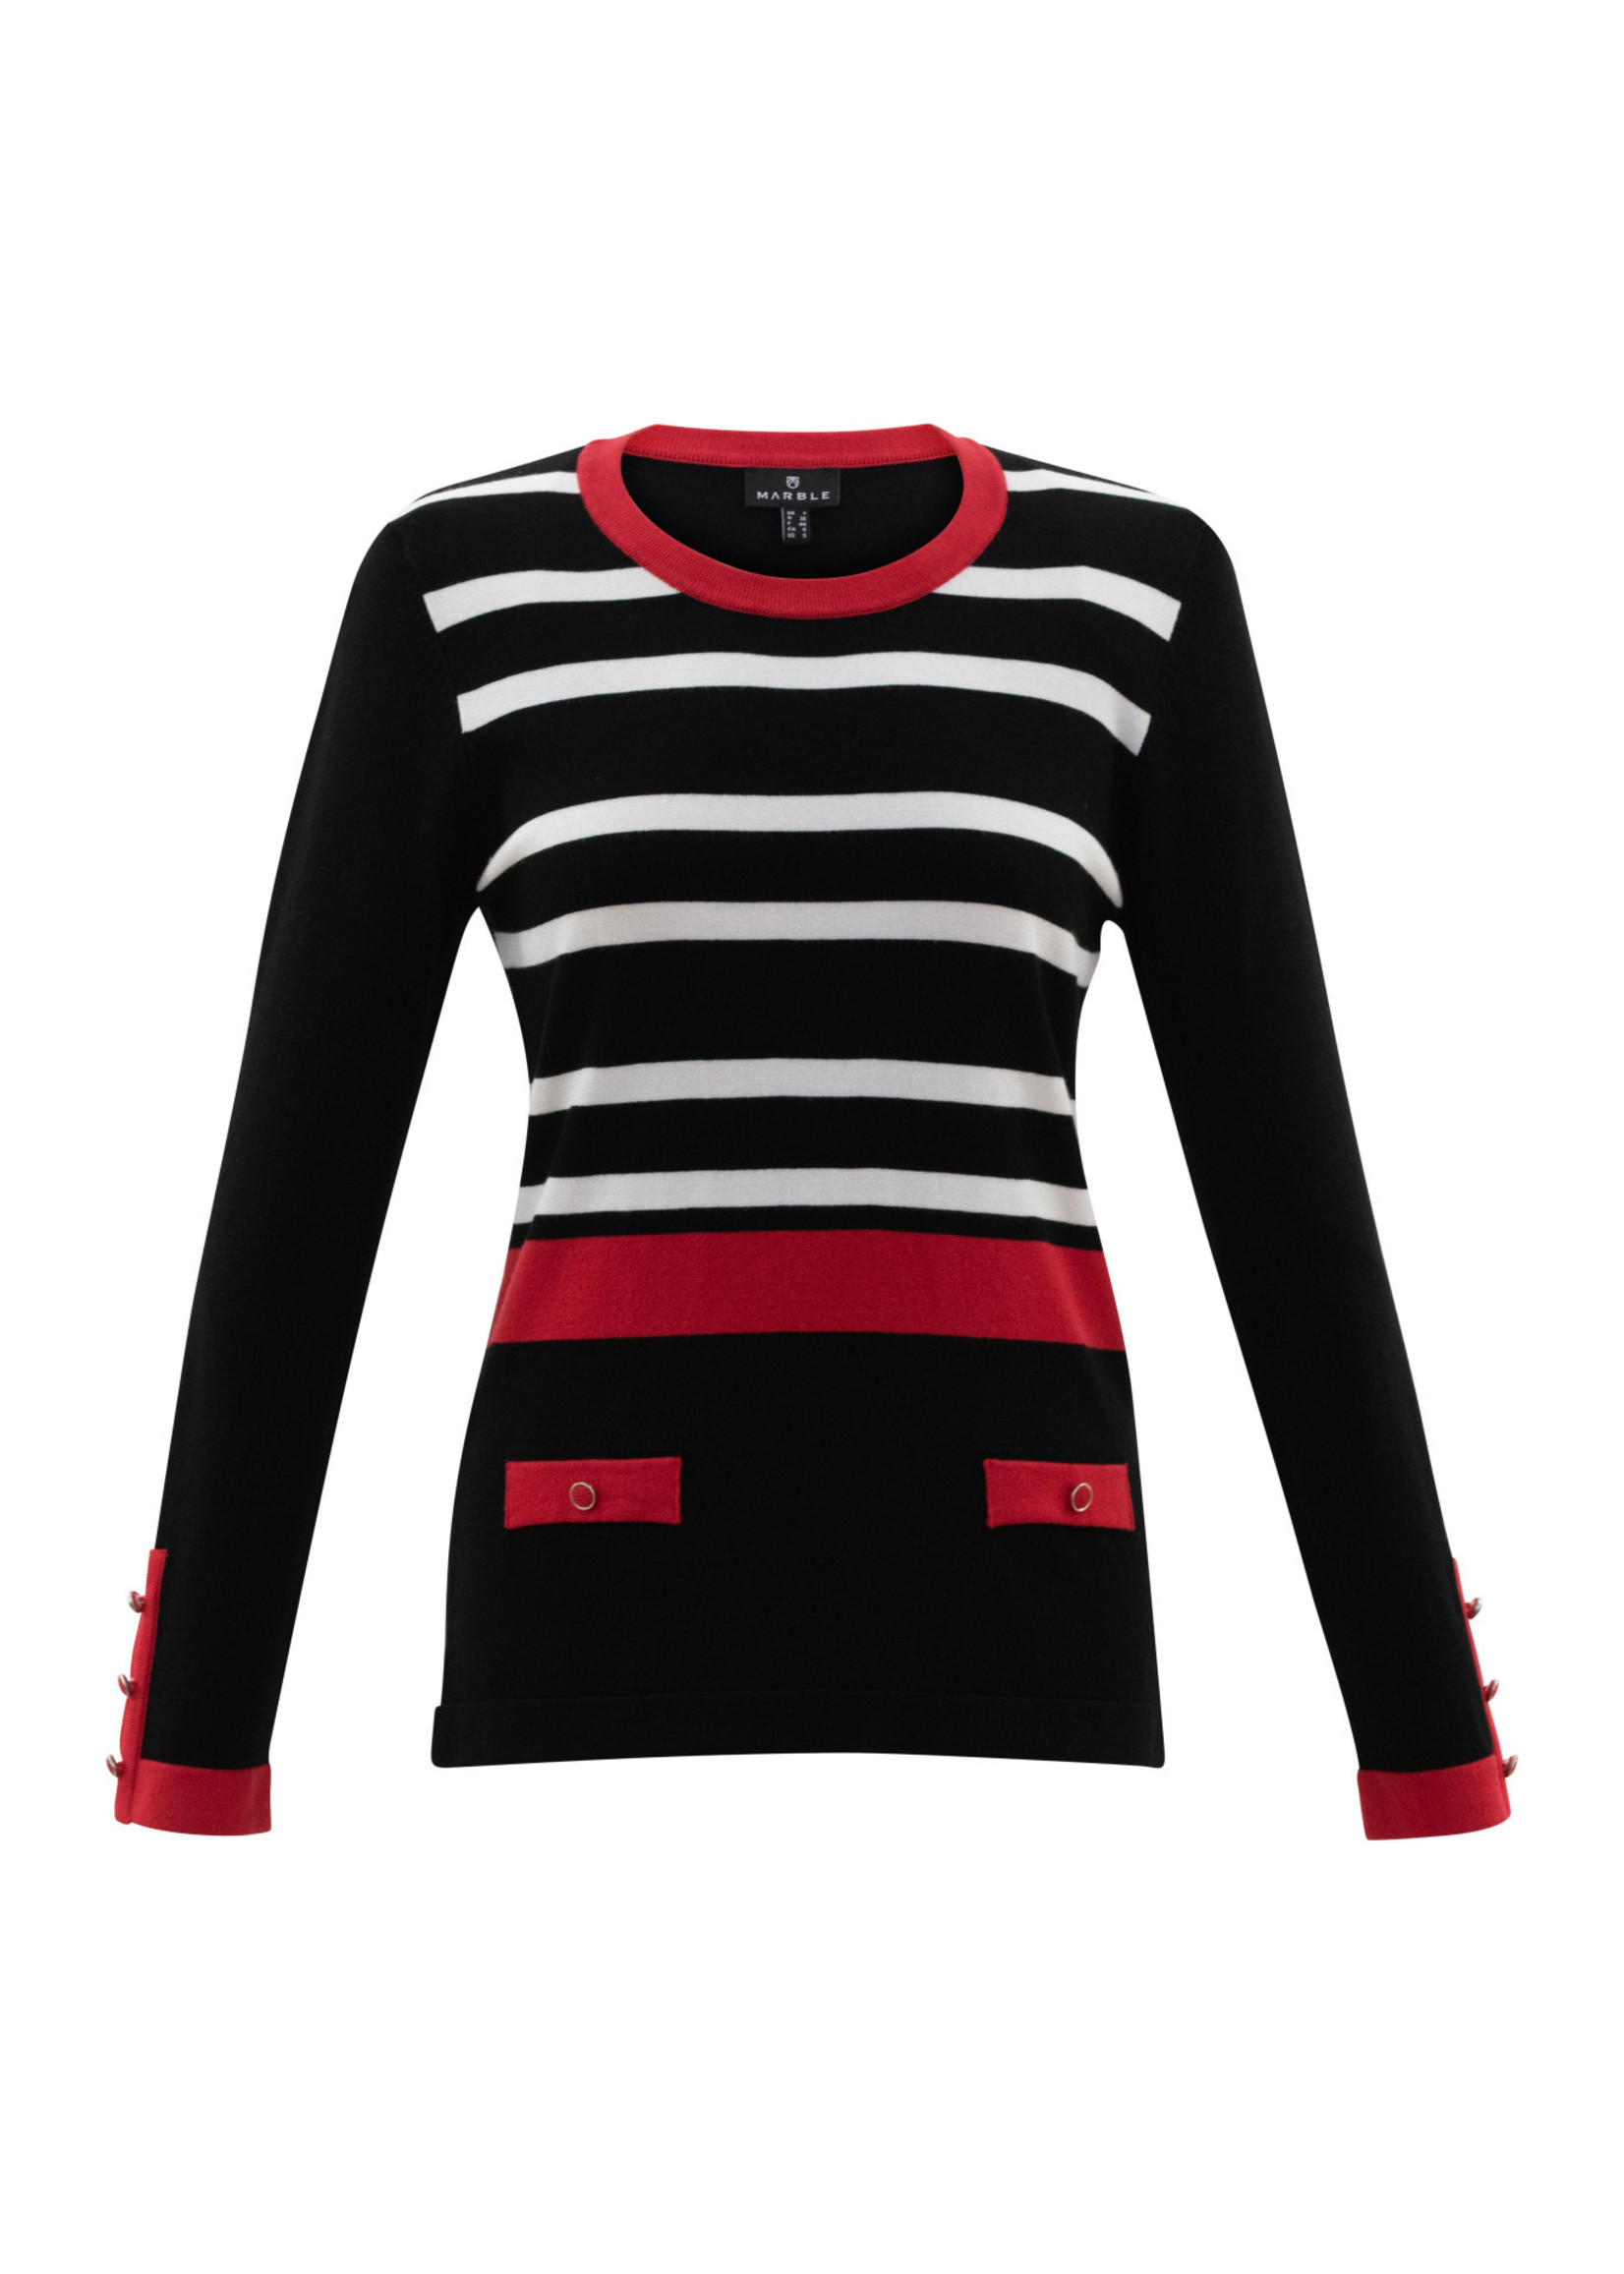 Marble Marble Striped Sweater w/Button Detail Black/Red/White